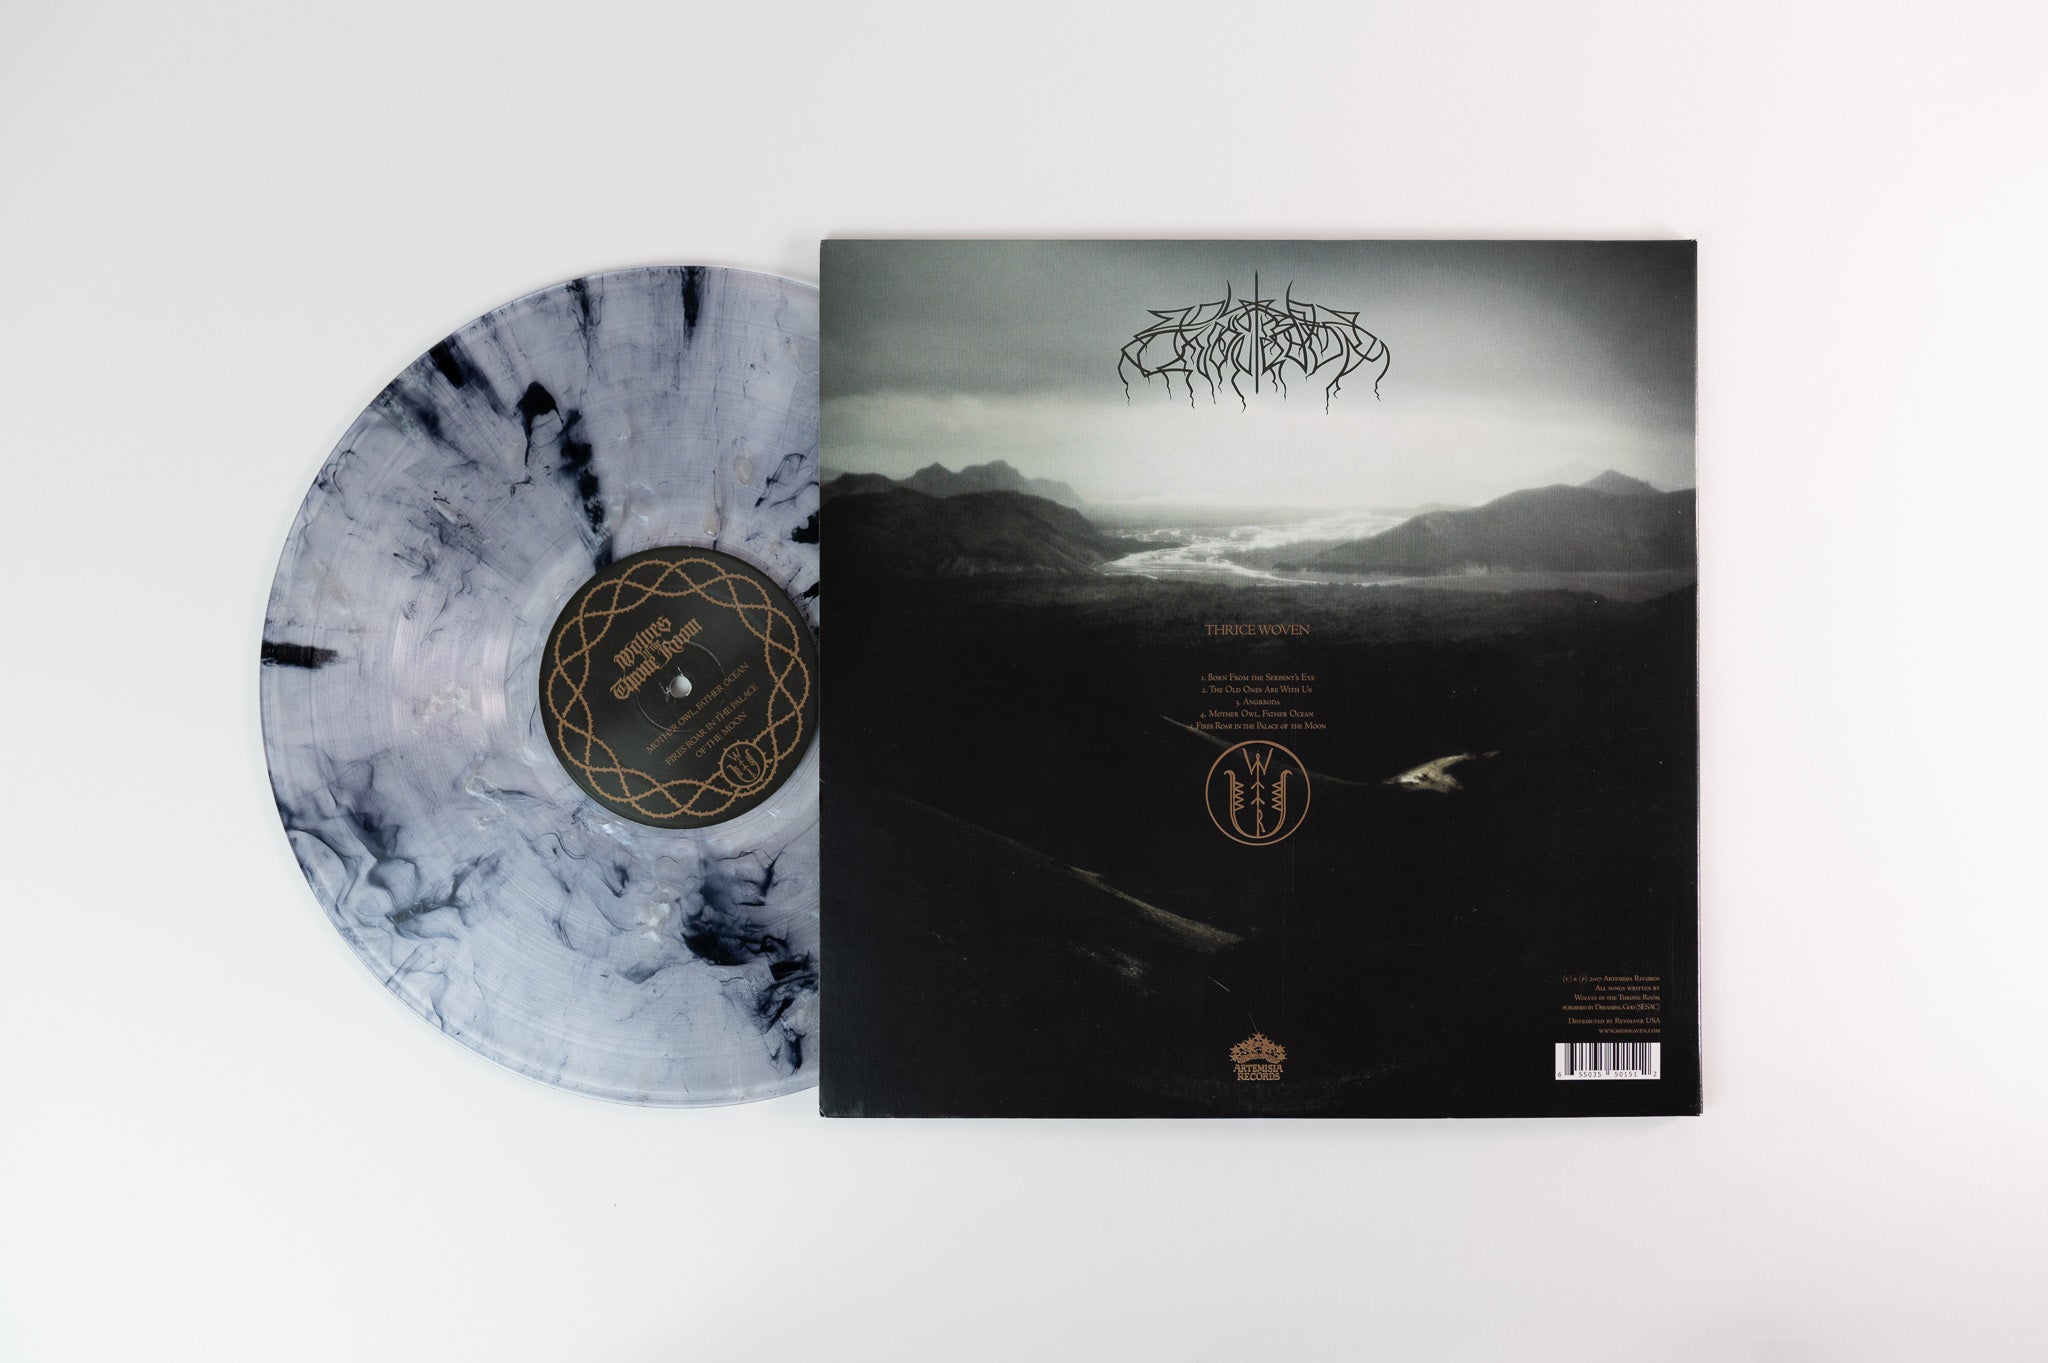 Wolves In The Throne Room - Thrice Woven on Artemisia Records - Colored Vinyl